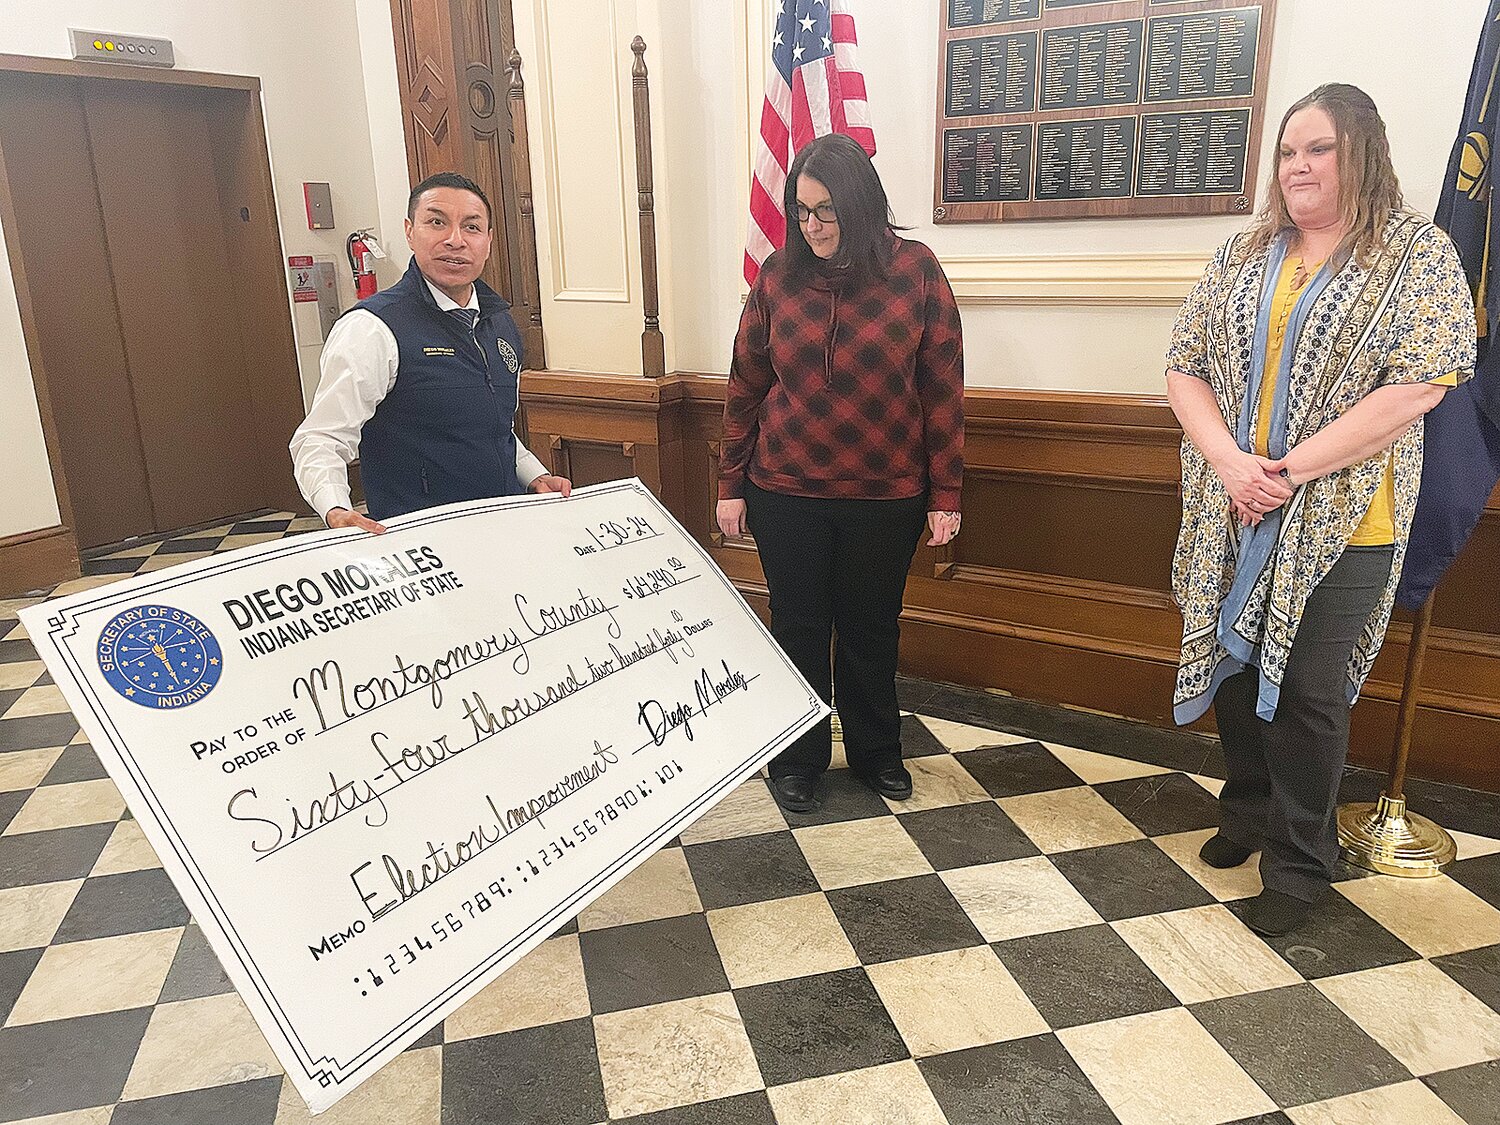 Secretary of State Diego Morales, left, holds a ceremonial check for $64,240 to be awarded to the Montgomery County Clerk’s Office. Accepting the award is election coordinator Cassandra Jett, center, and Montgomery County Clerk Leah Denbo. The funds will be used to purchase election equipment.